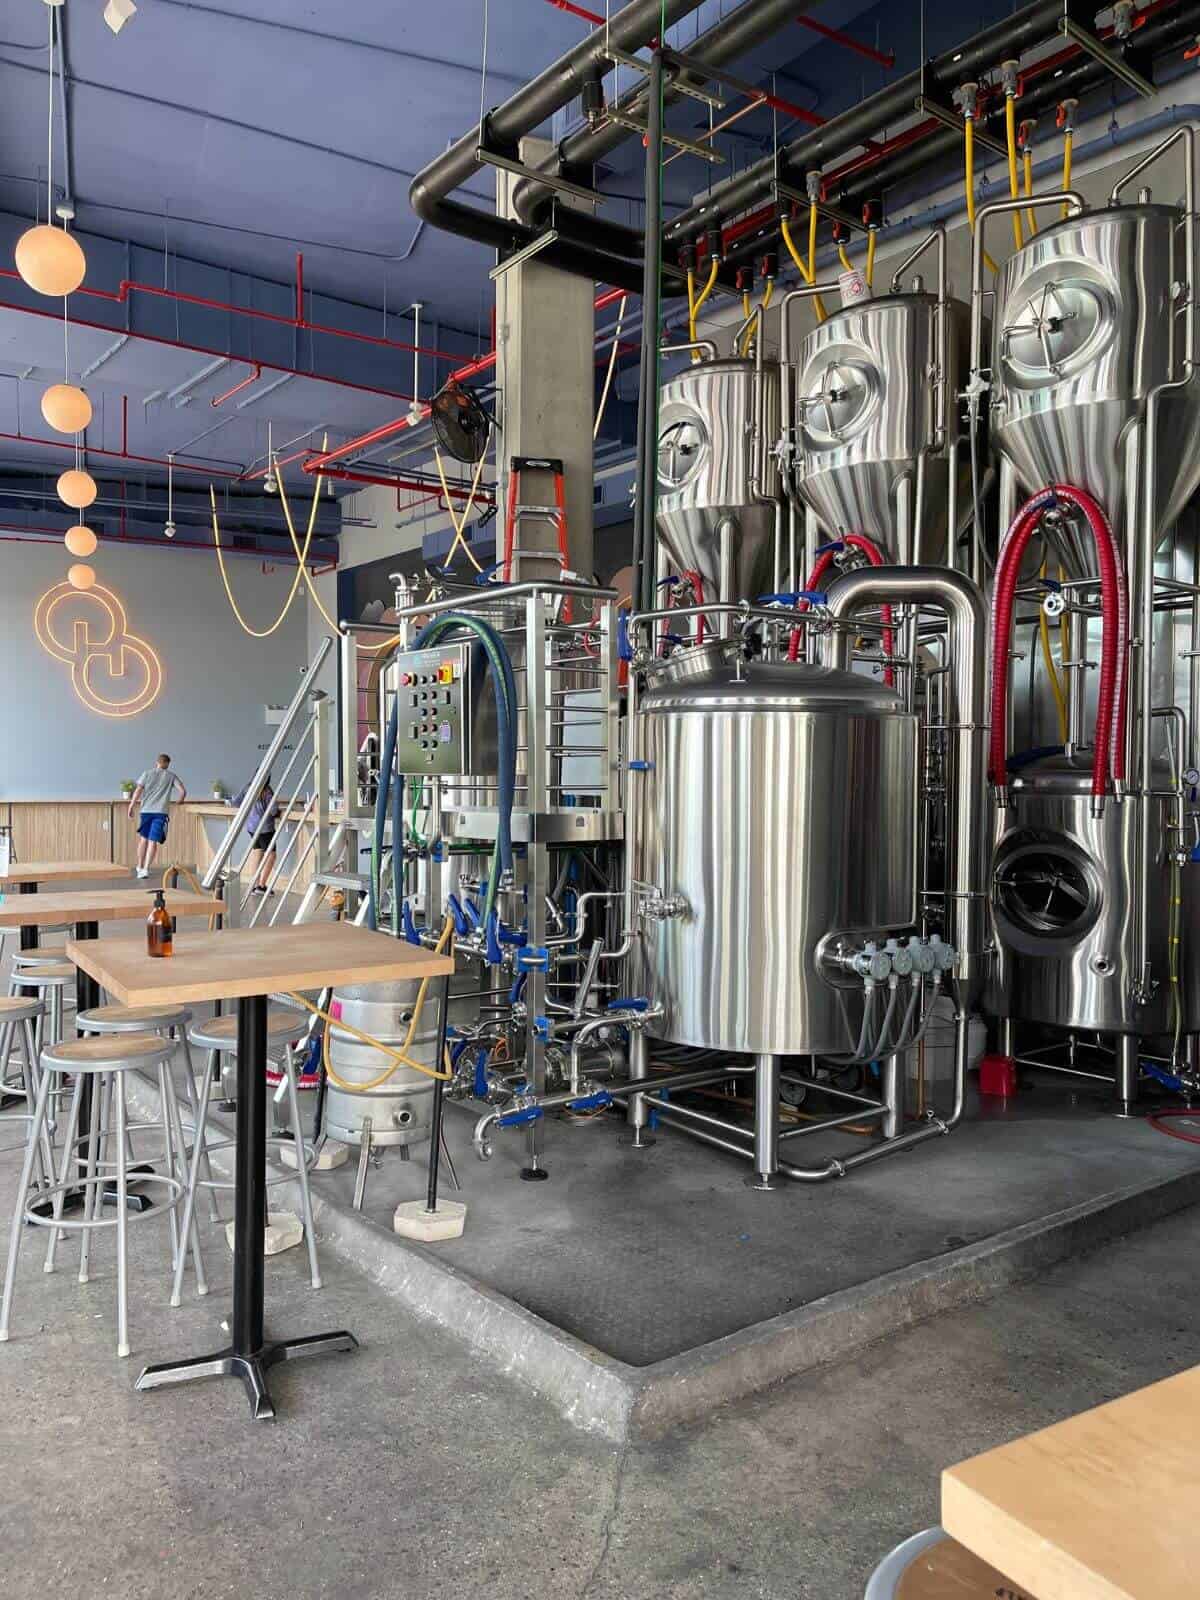 Brewery area of Other Half Brewing Company.